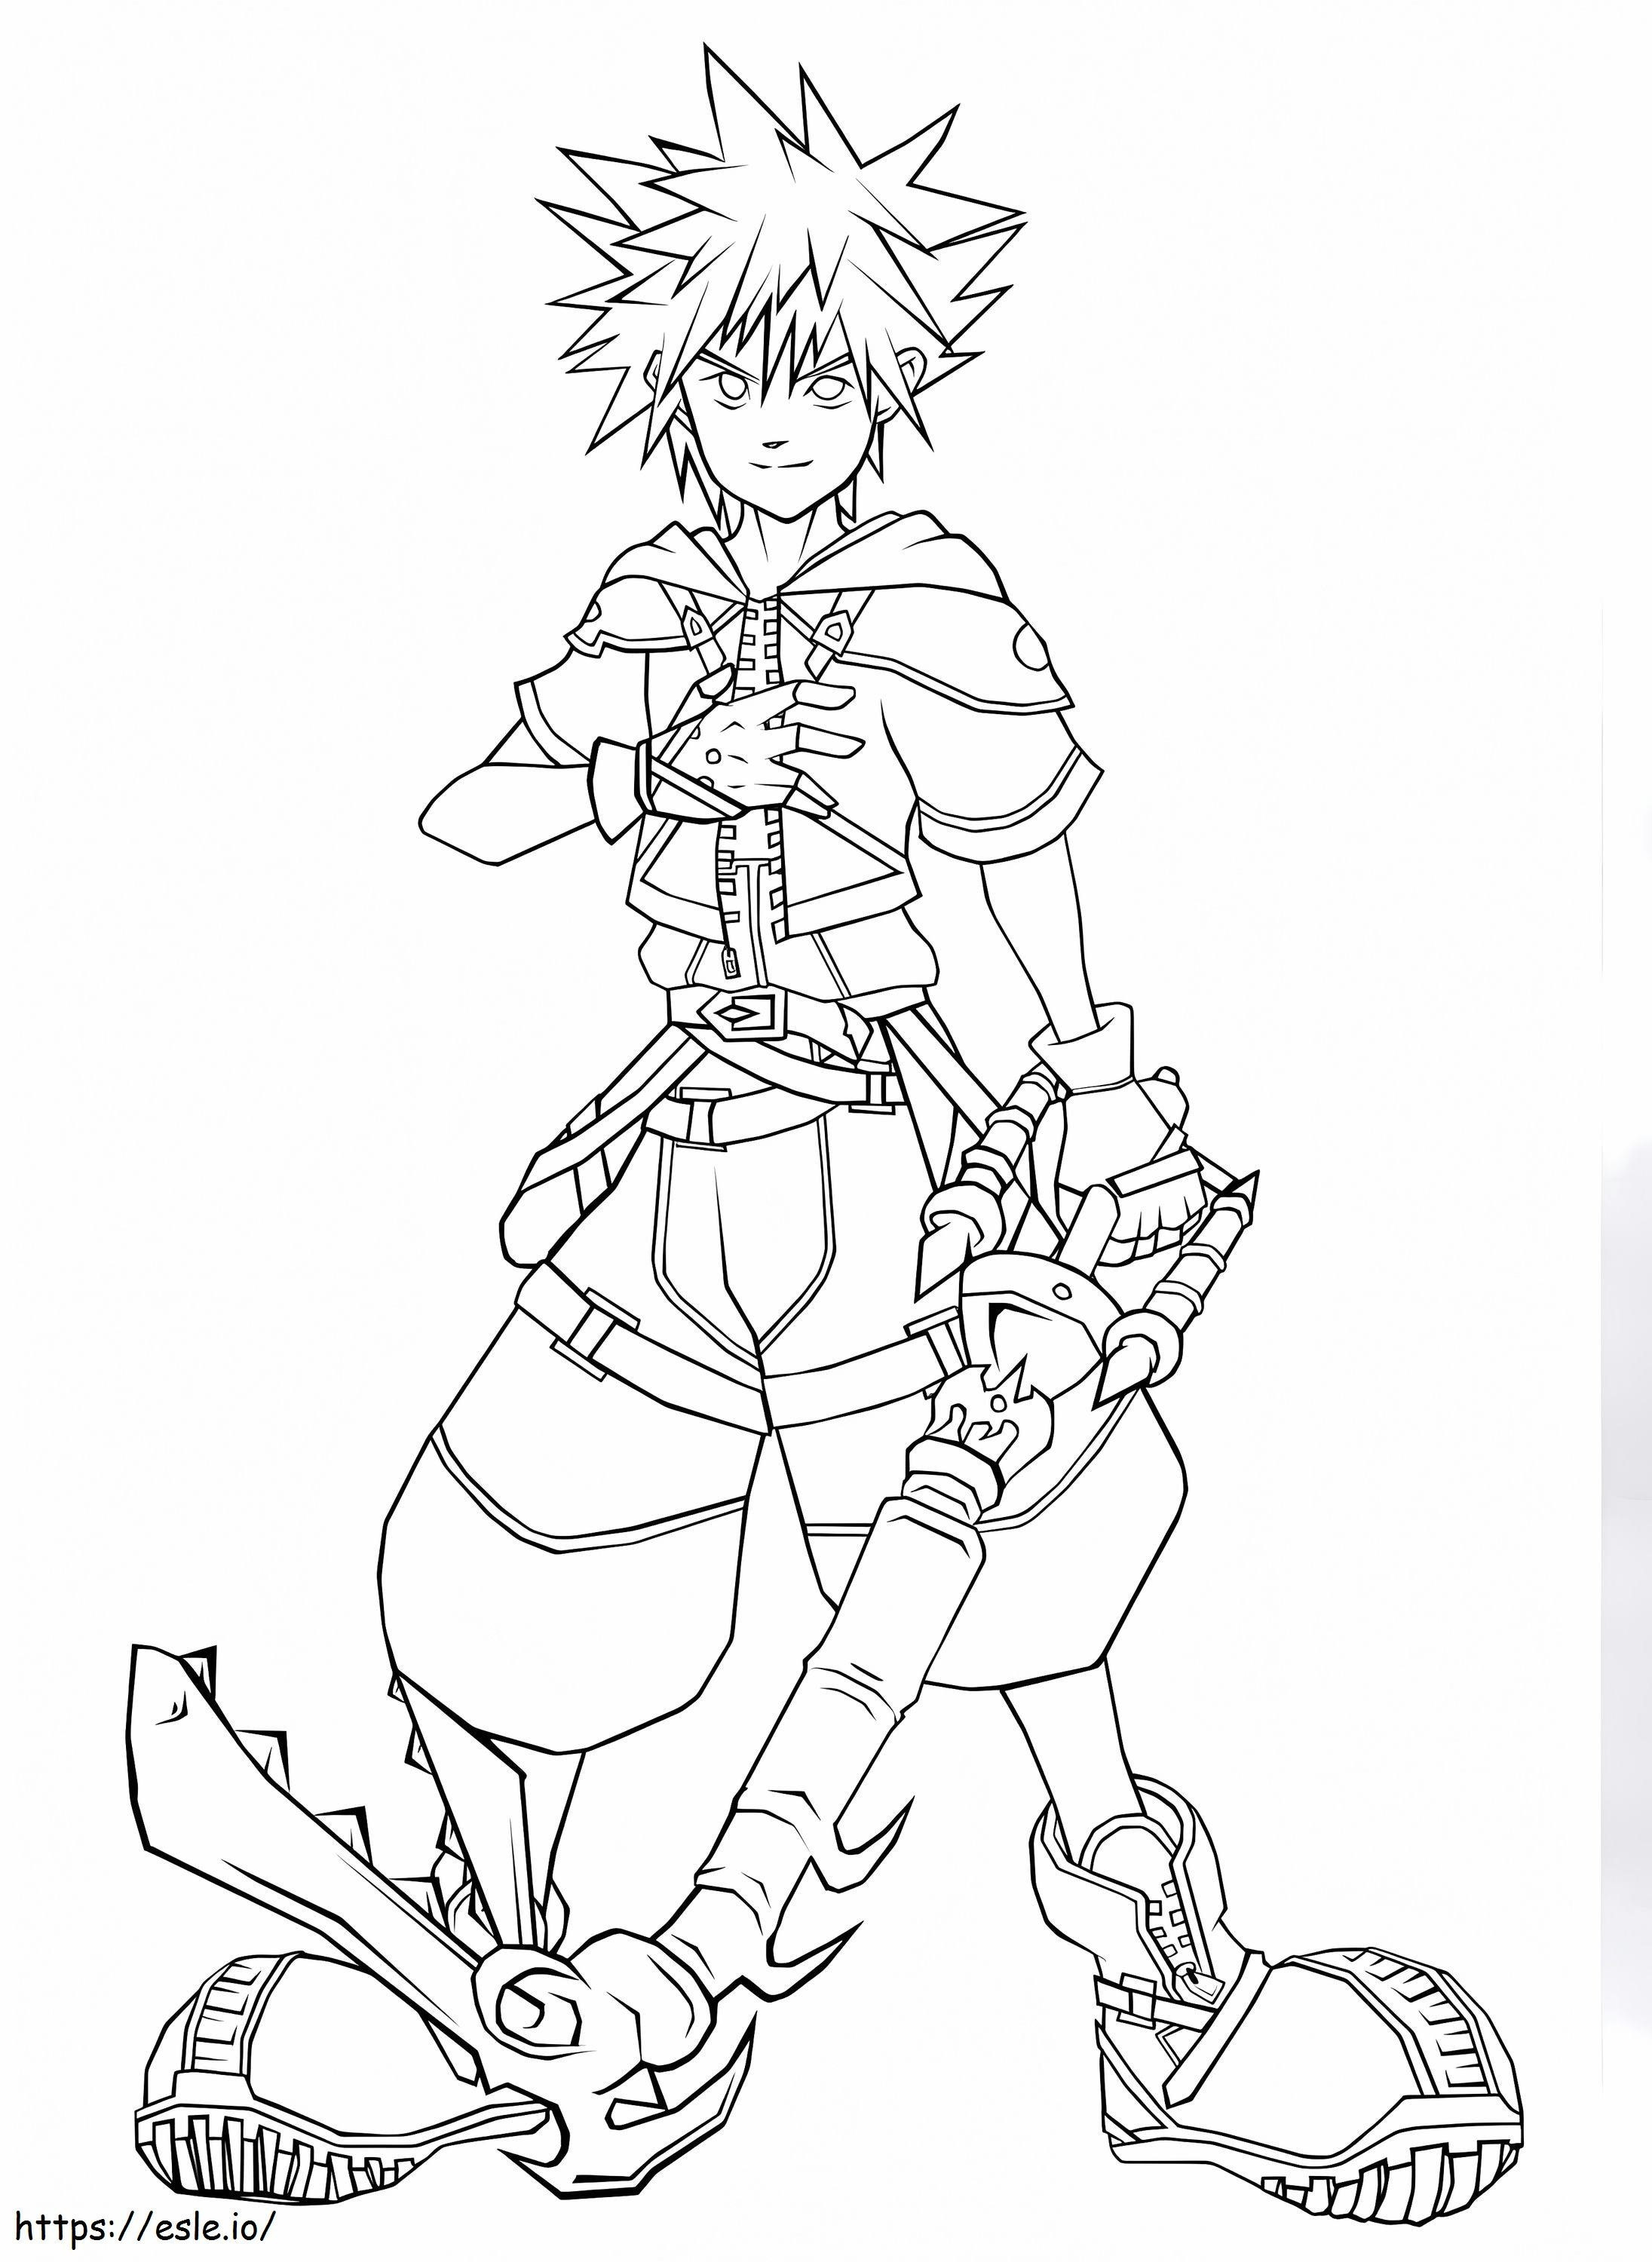 Sora From Kingdom Hearts coloring page